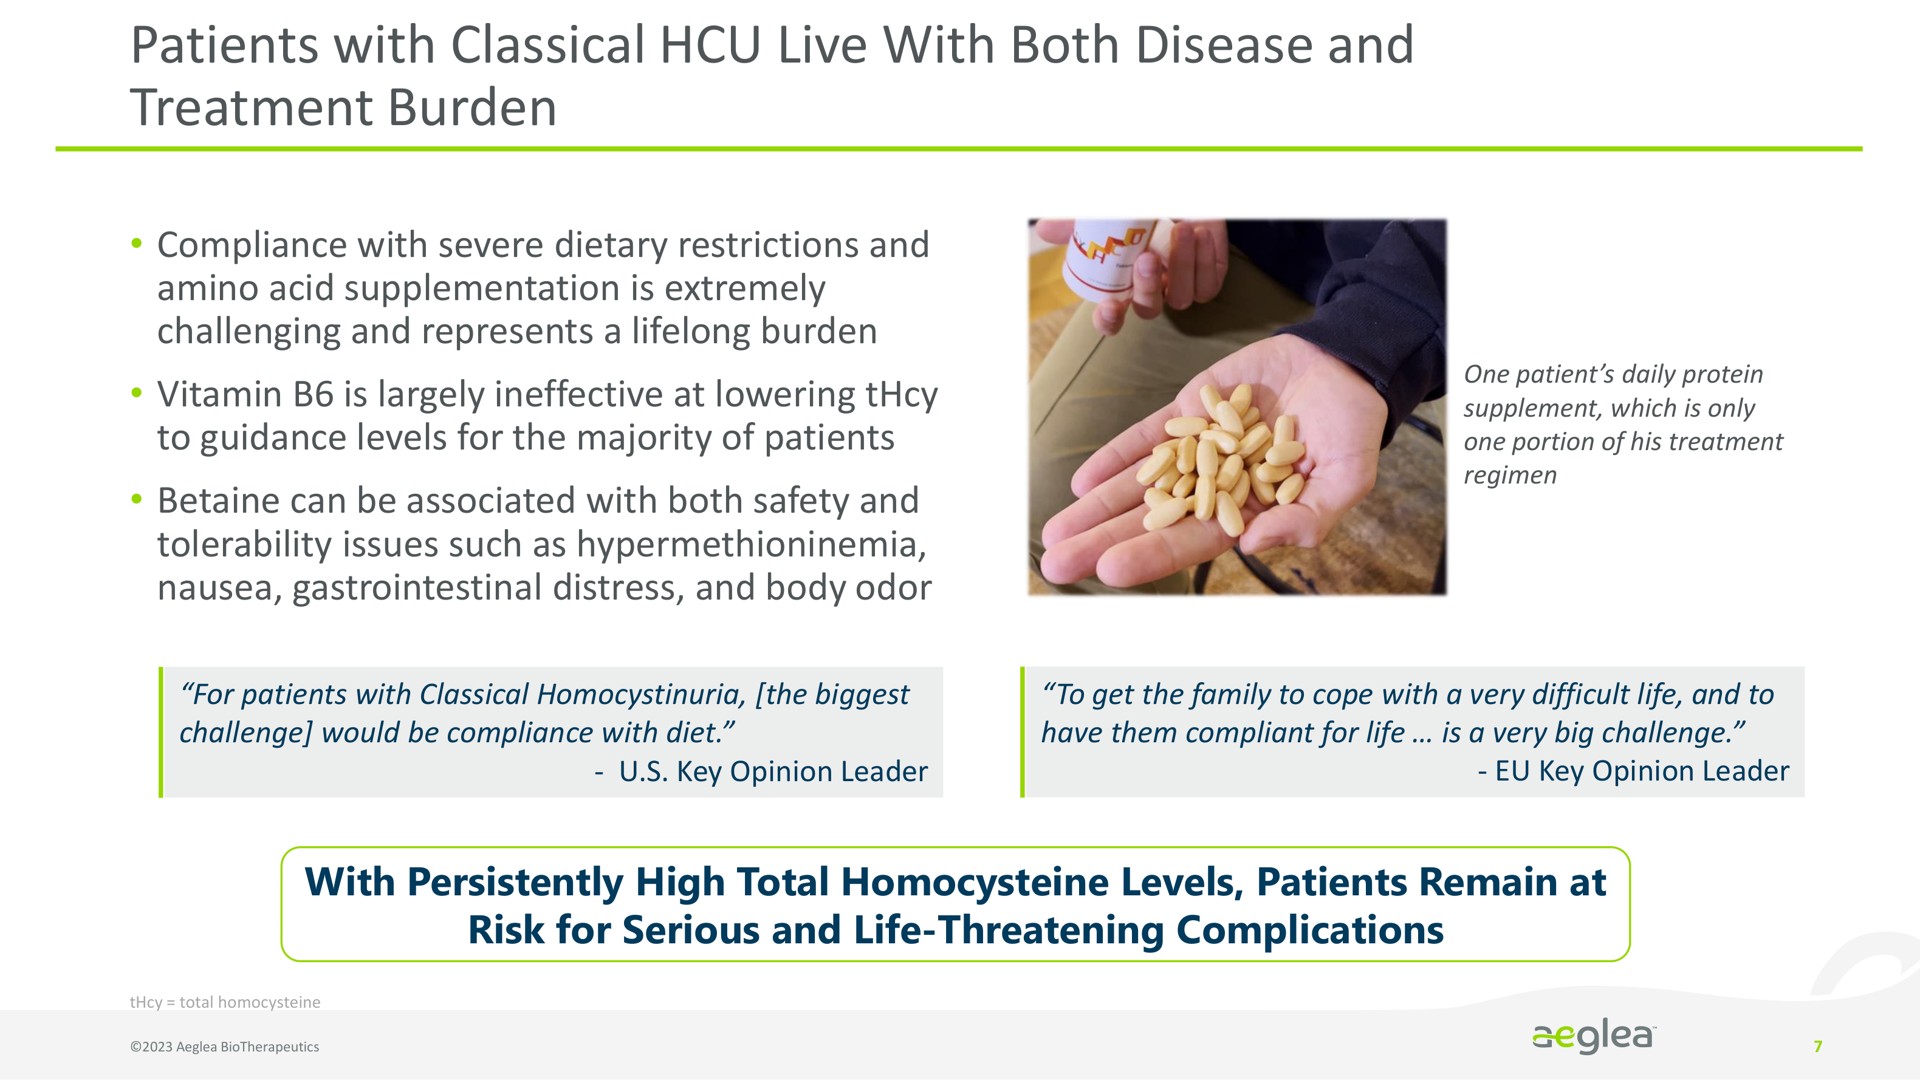 patients with classical live with both disease and treatment burden persistently high total levels remain at | Aeglea BioTherapeutics